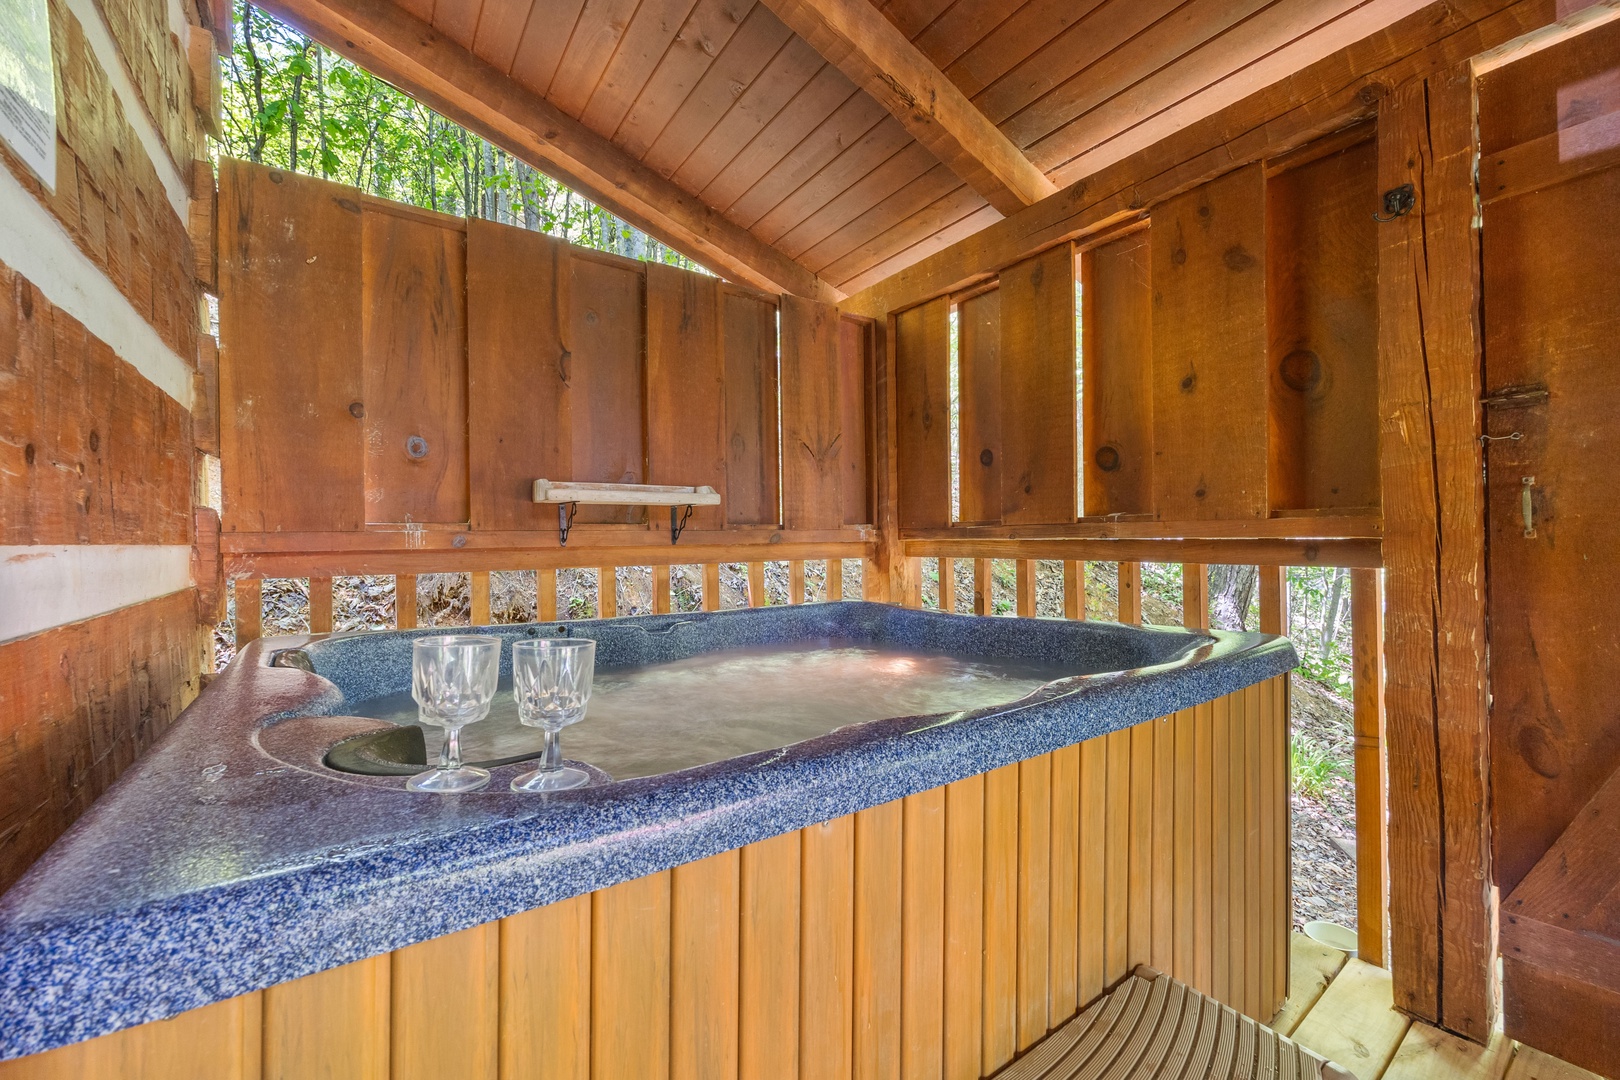 Hot tub on a covered deck with privacy fence at Bearfoot Crossing, a 1-bedroom cabin rental located in Pigeon Forge